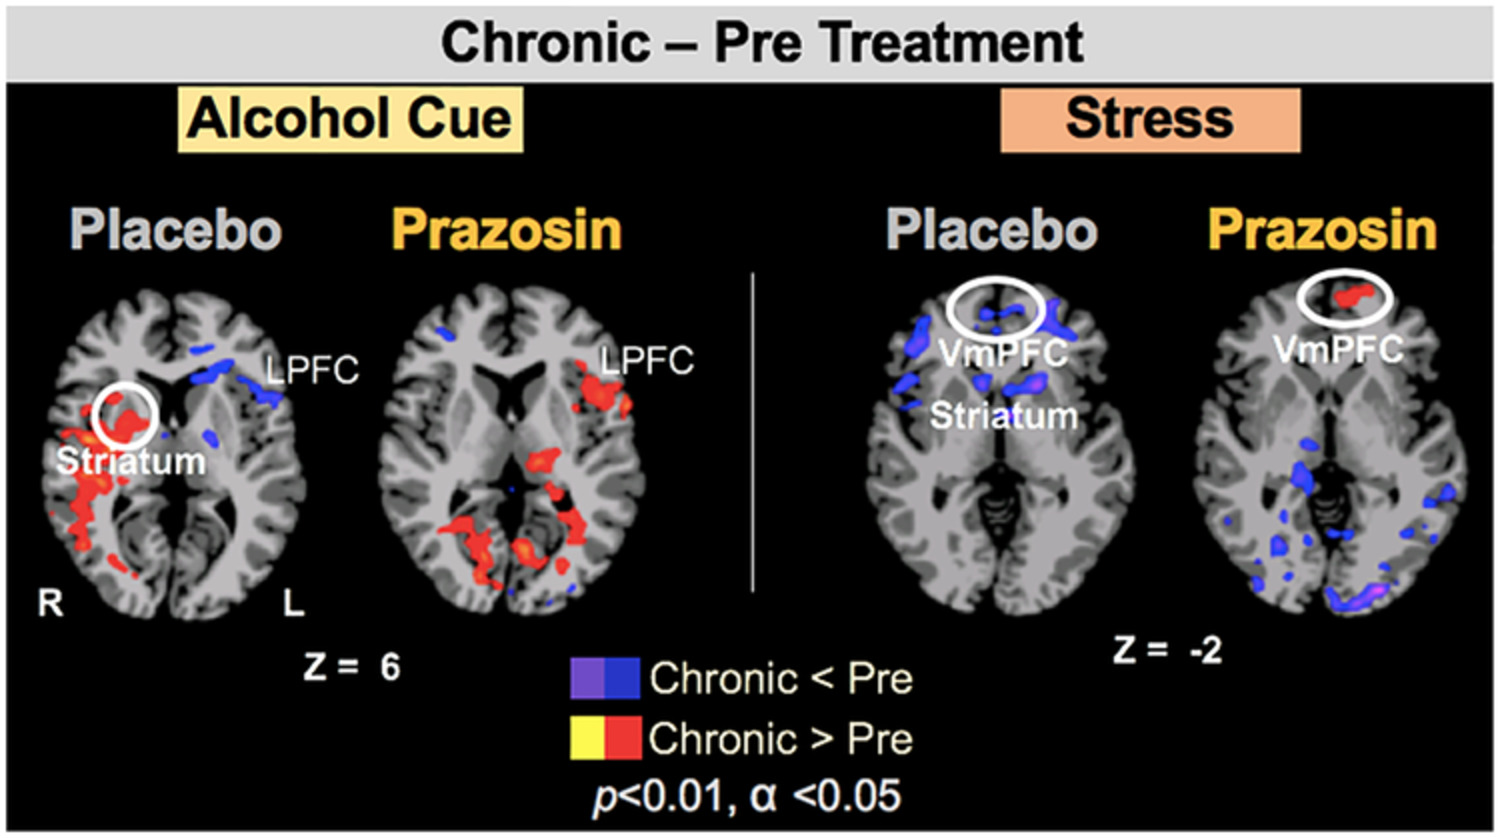 Alcohol withdrawal symptoms predict corticostriatal dysfunction that is reversed by prazosin treatment in alcohol use disorder